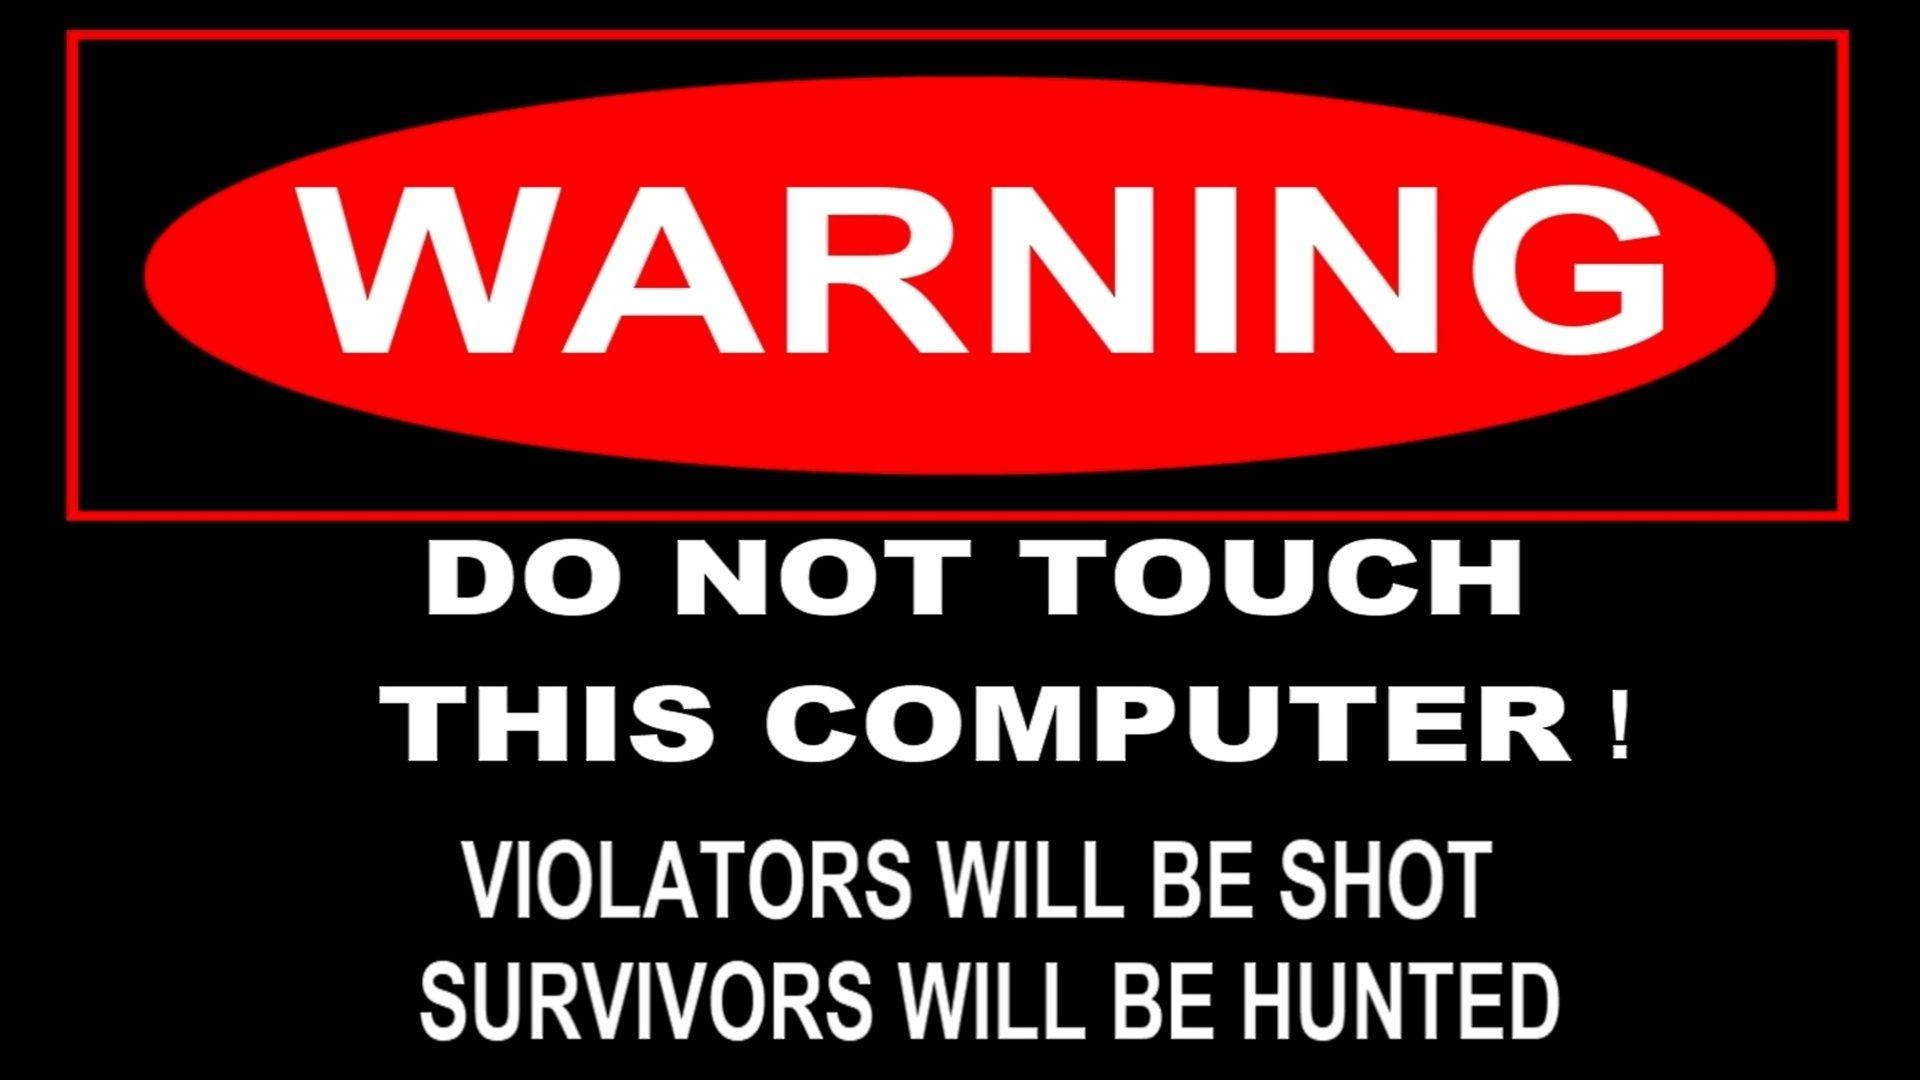 Warning Do Not Touch This Computer ! Full HD Wallpaper